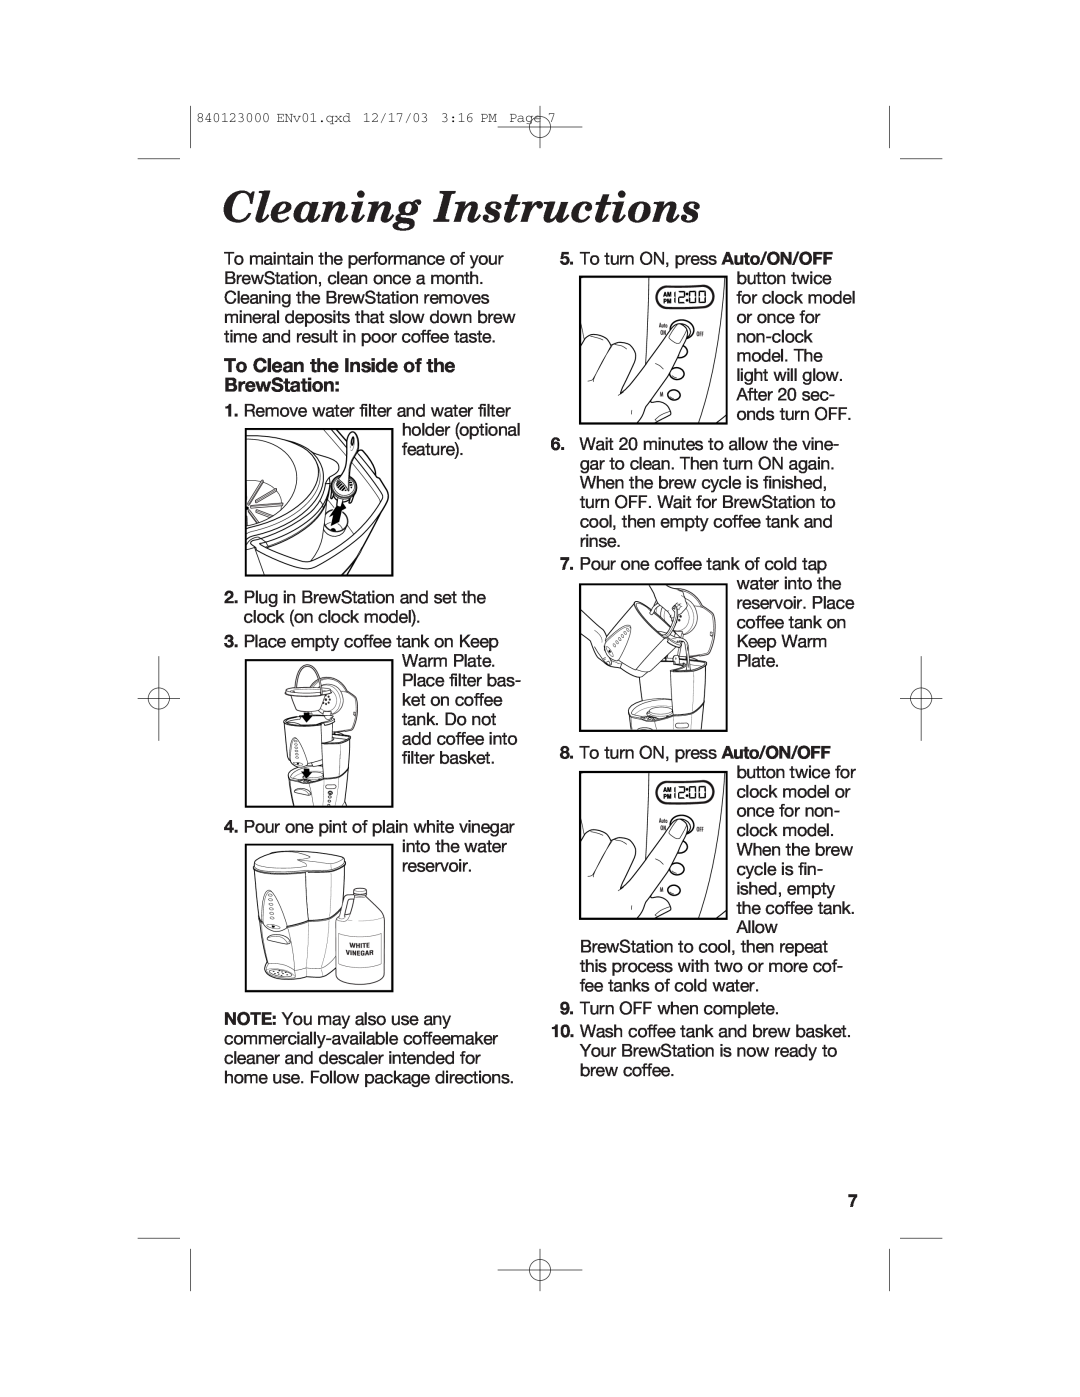 Hamilton Beach 840123000 manual Cleaning Instructions, To Clean the Inside of the BrewStation 